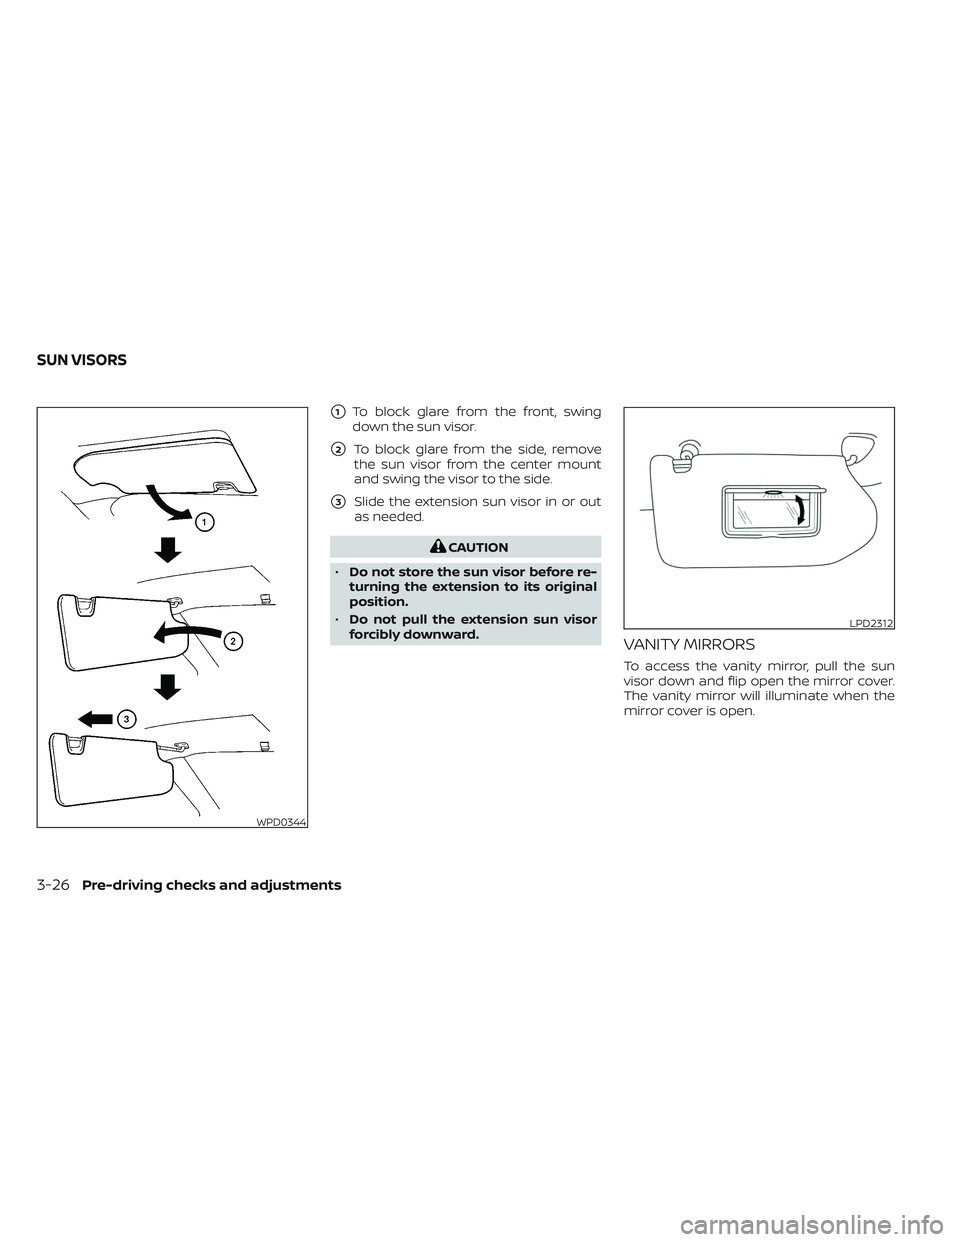 NISSAN MAXIMA 2023  Owners Manual 1To block glare from the front, swing
down the sun visor.
2To block glare from the side, remove
the sun visor from the center mount
and swing the visor to the side.
3Slide the extension sun visor i